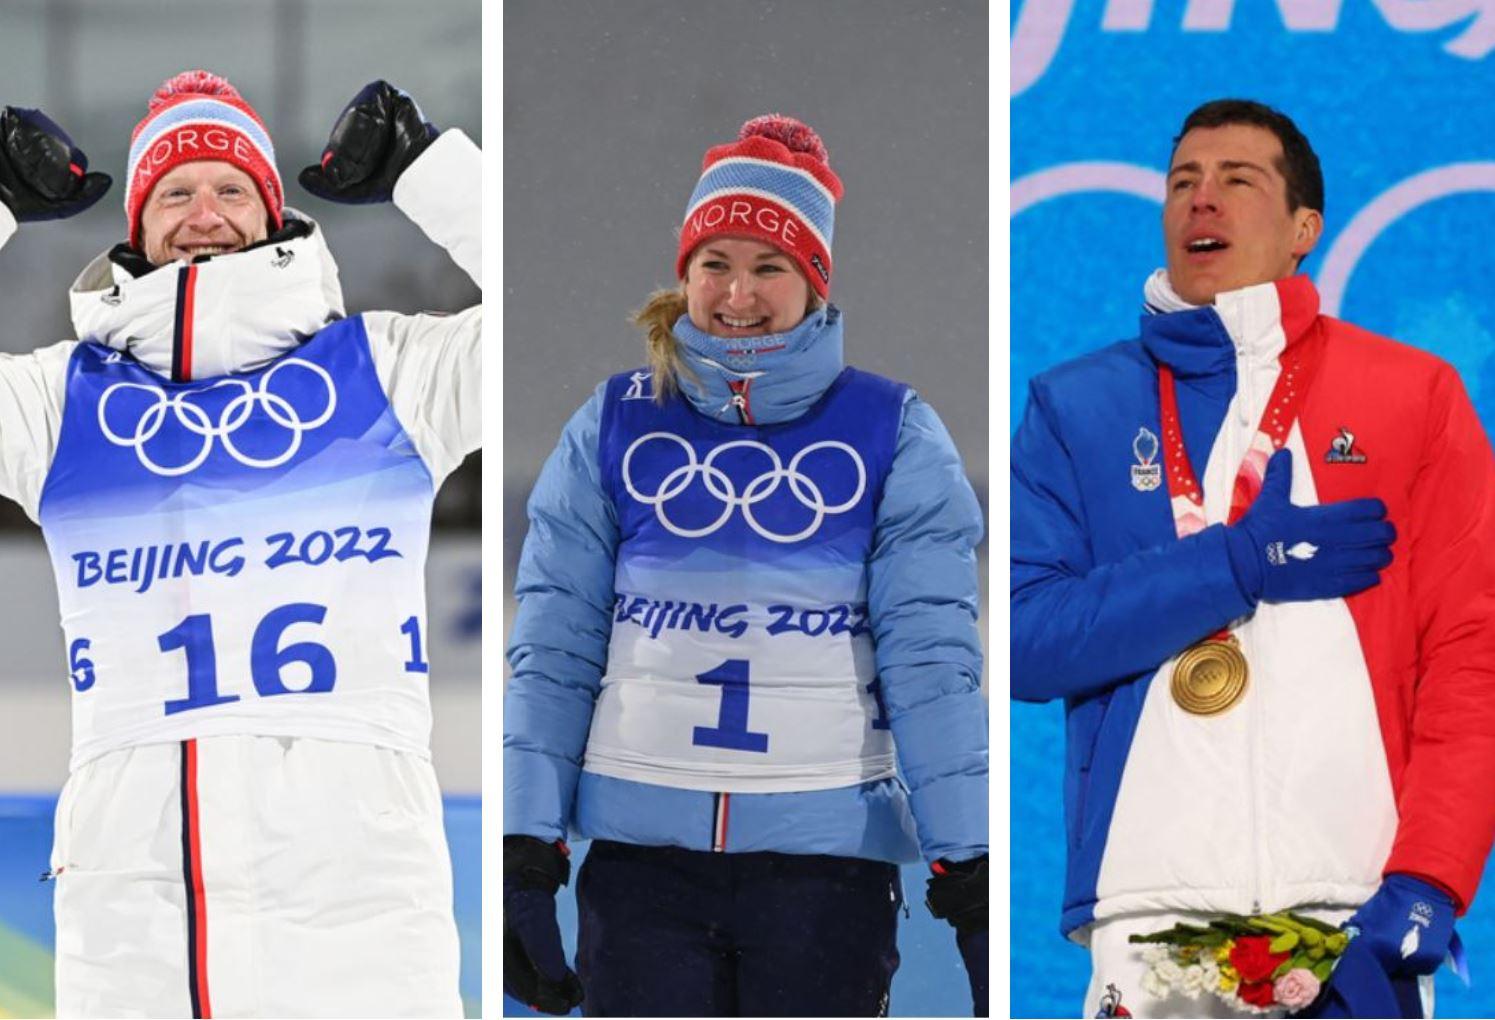 These athletes were the best in the Olympics - VG